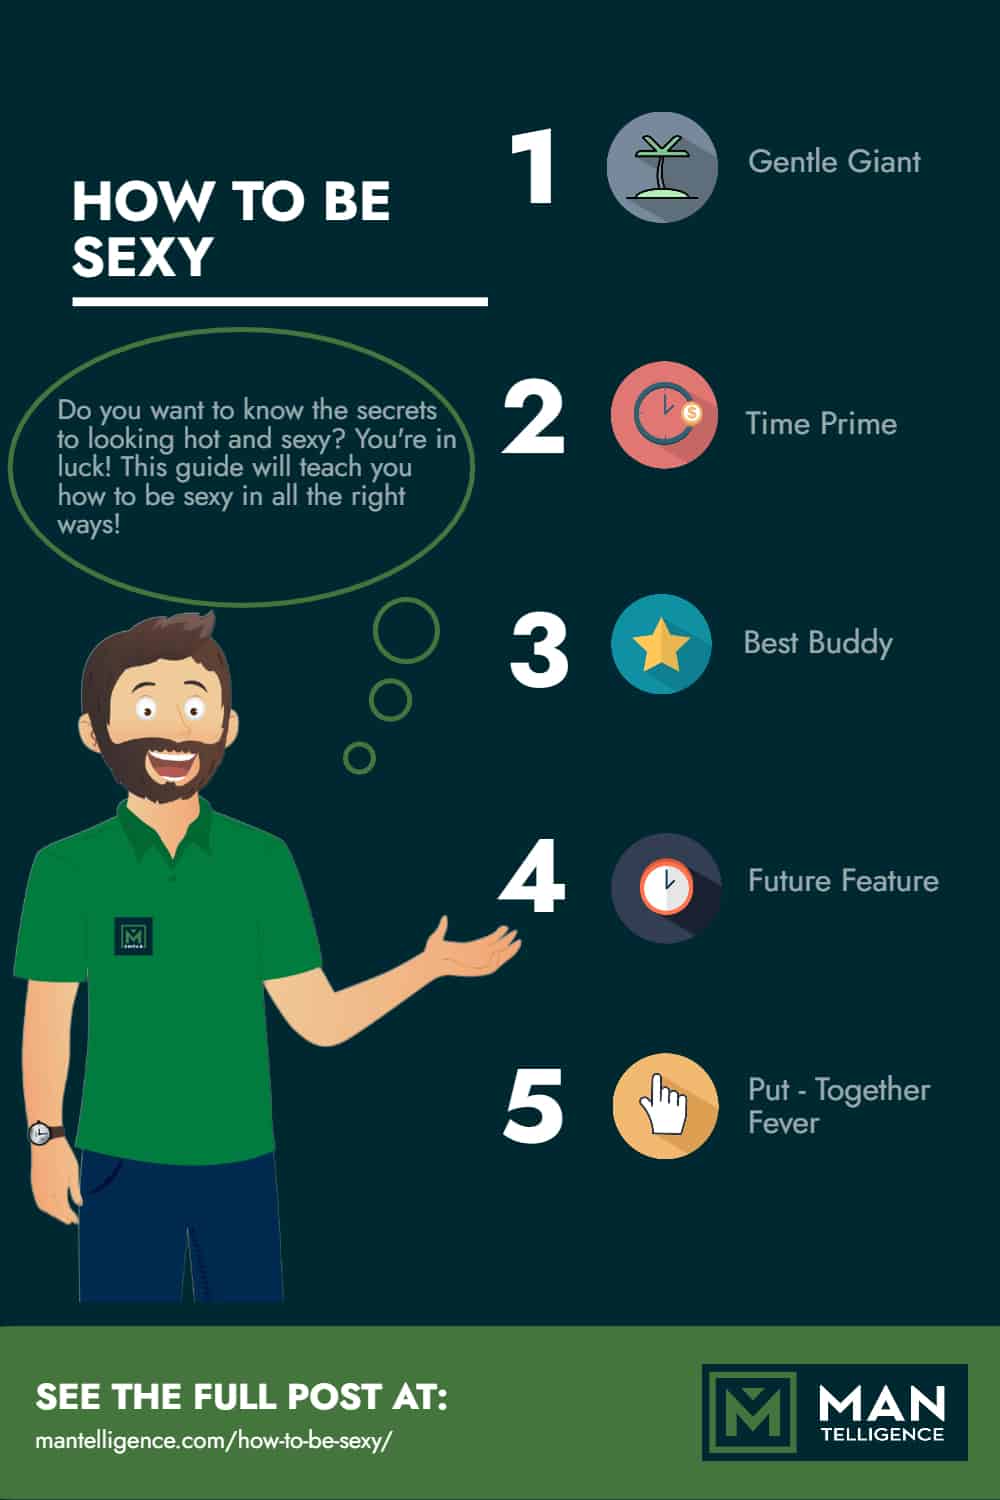 How To Be Sexy - Infographic